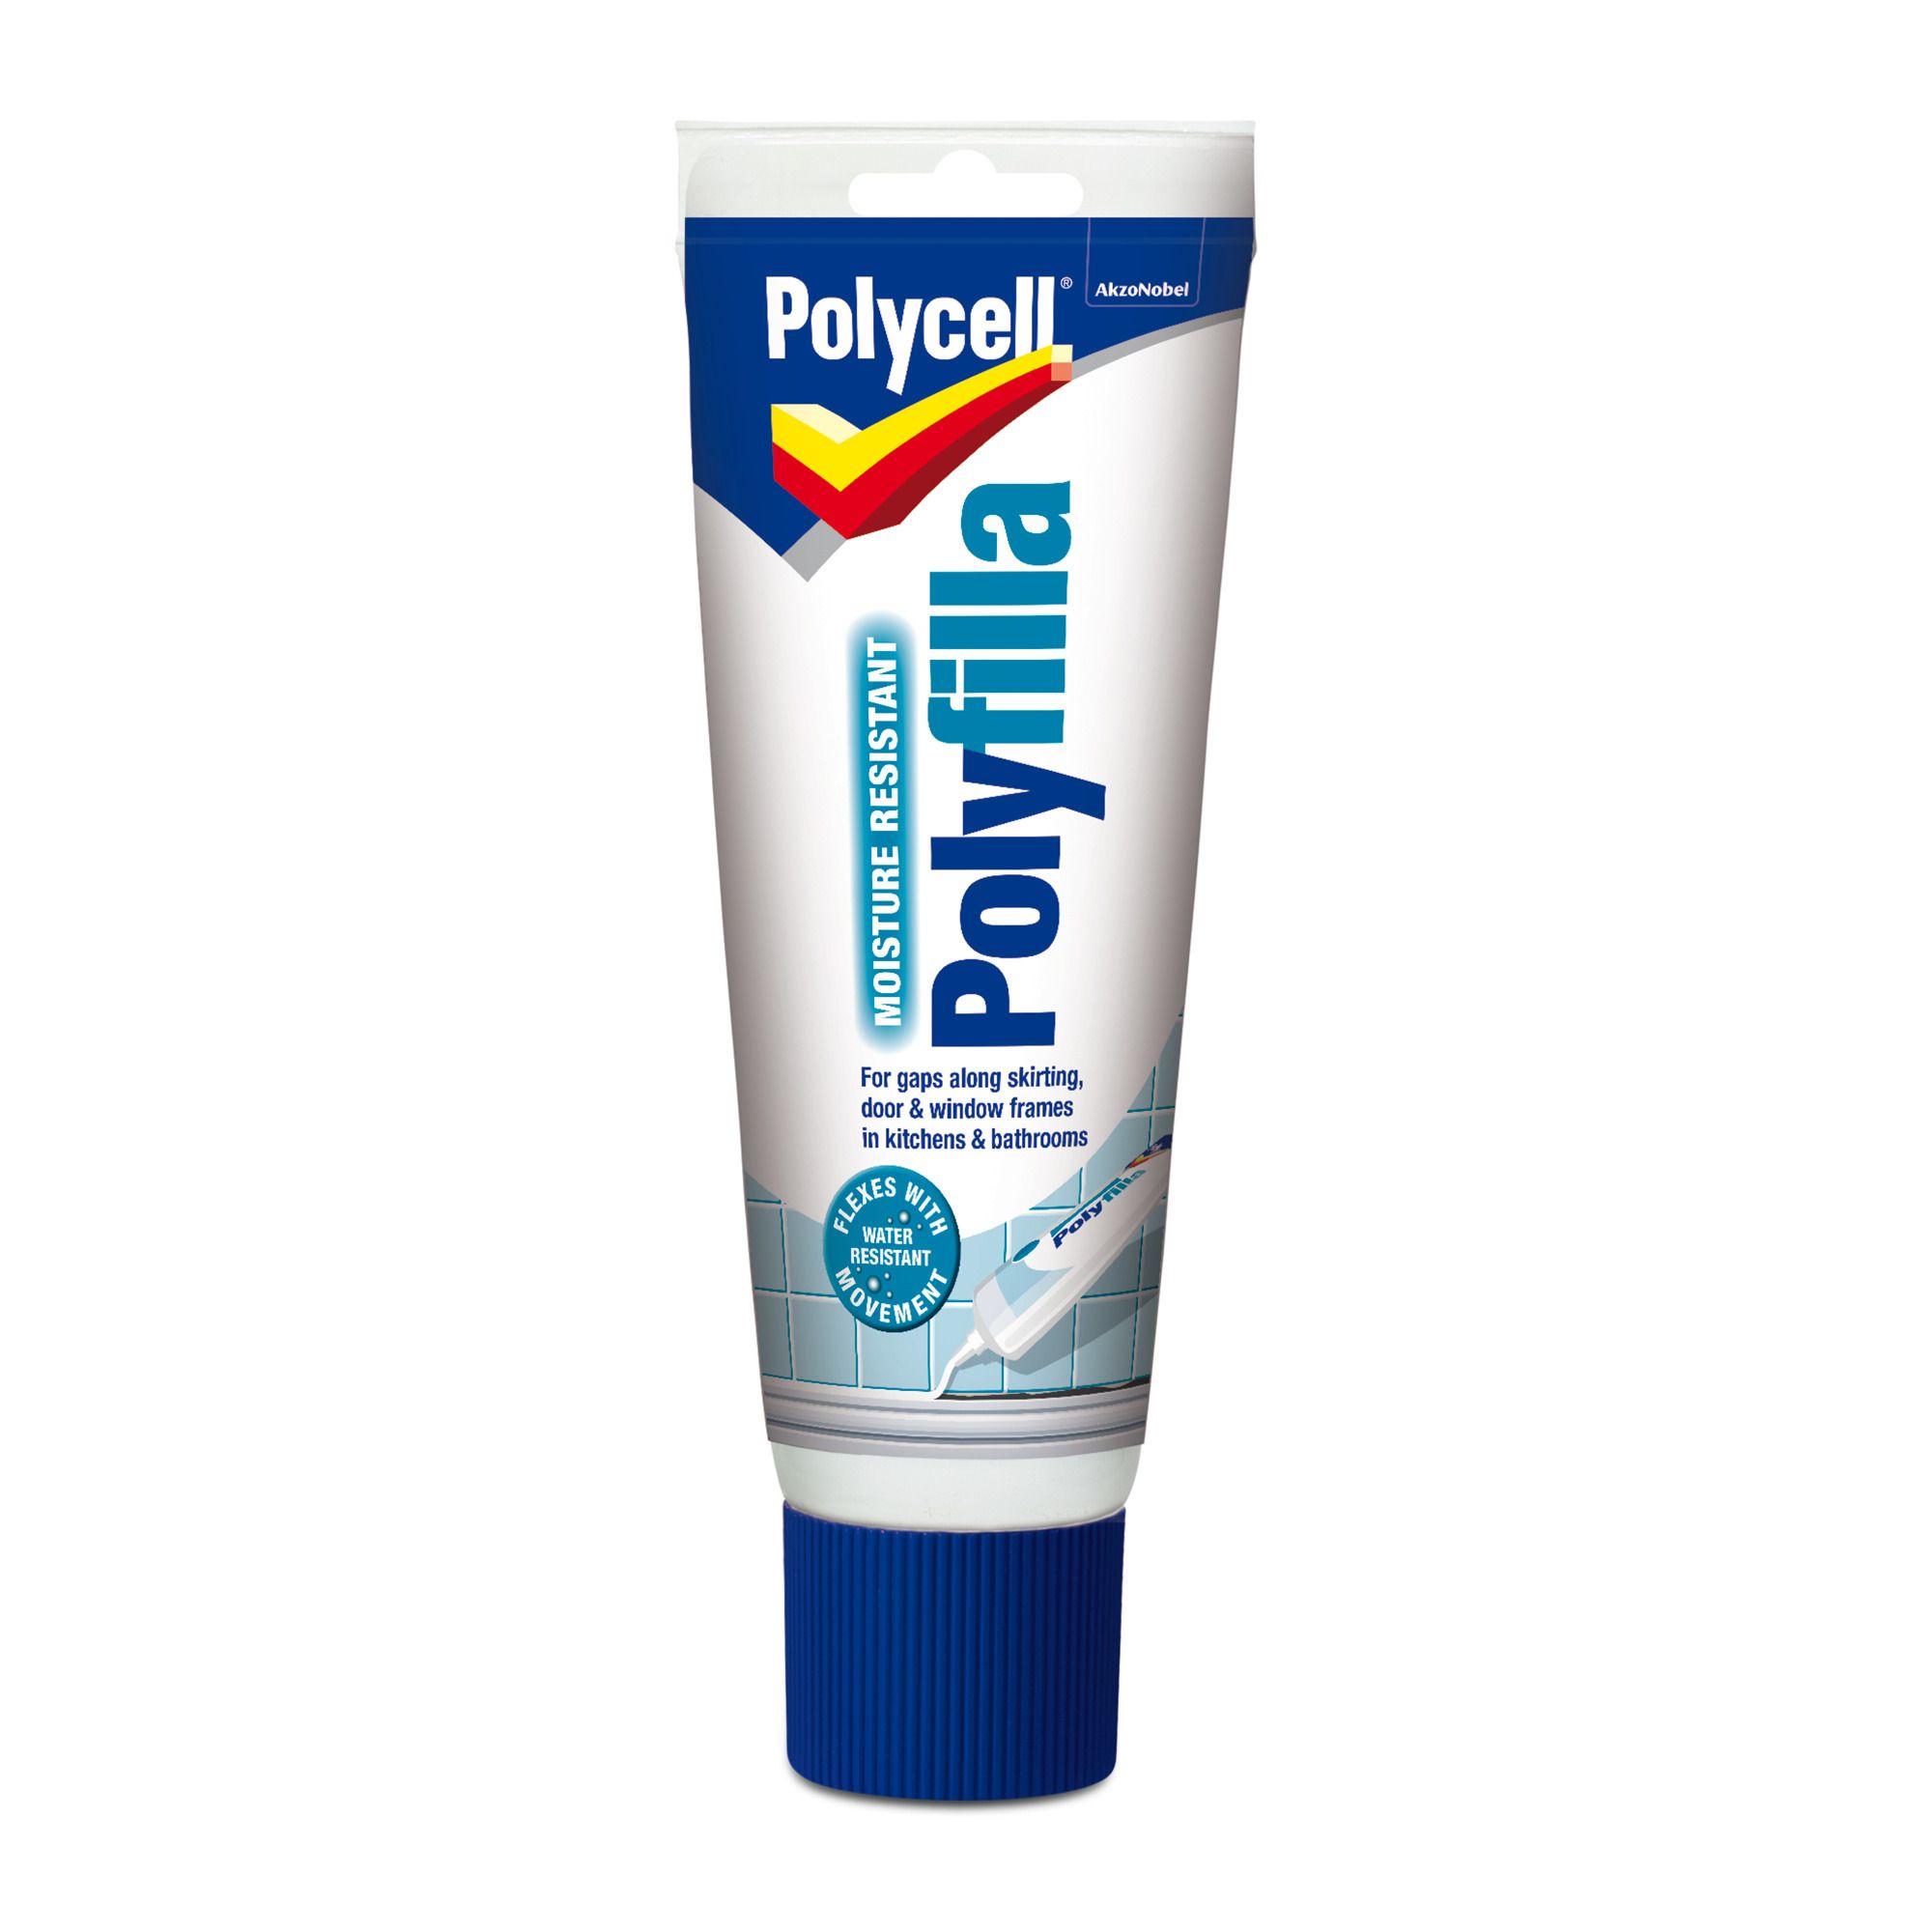 Polycell Kitchen & Bathroom White Ready mixed Filler, 0.33kg